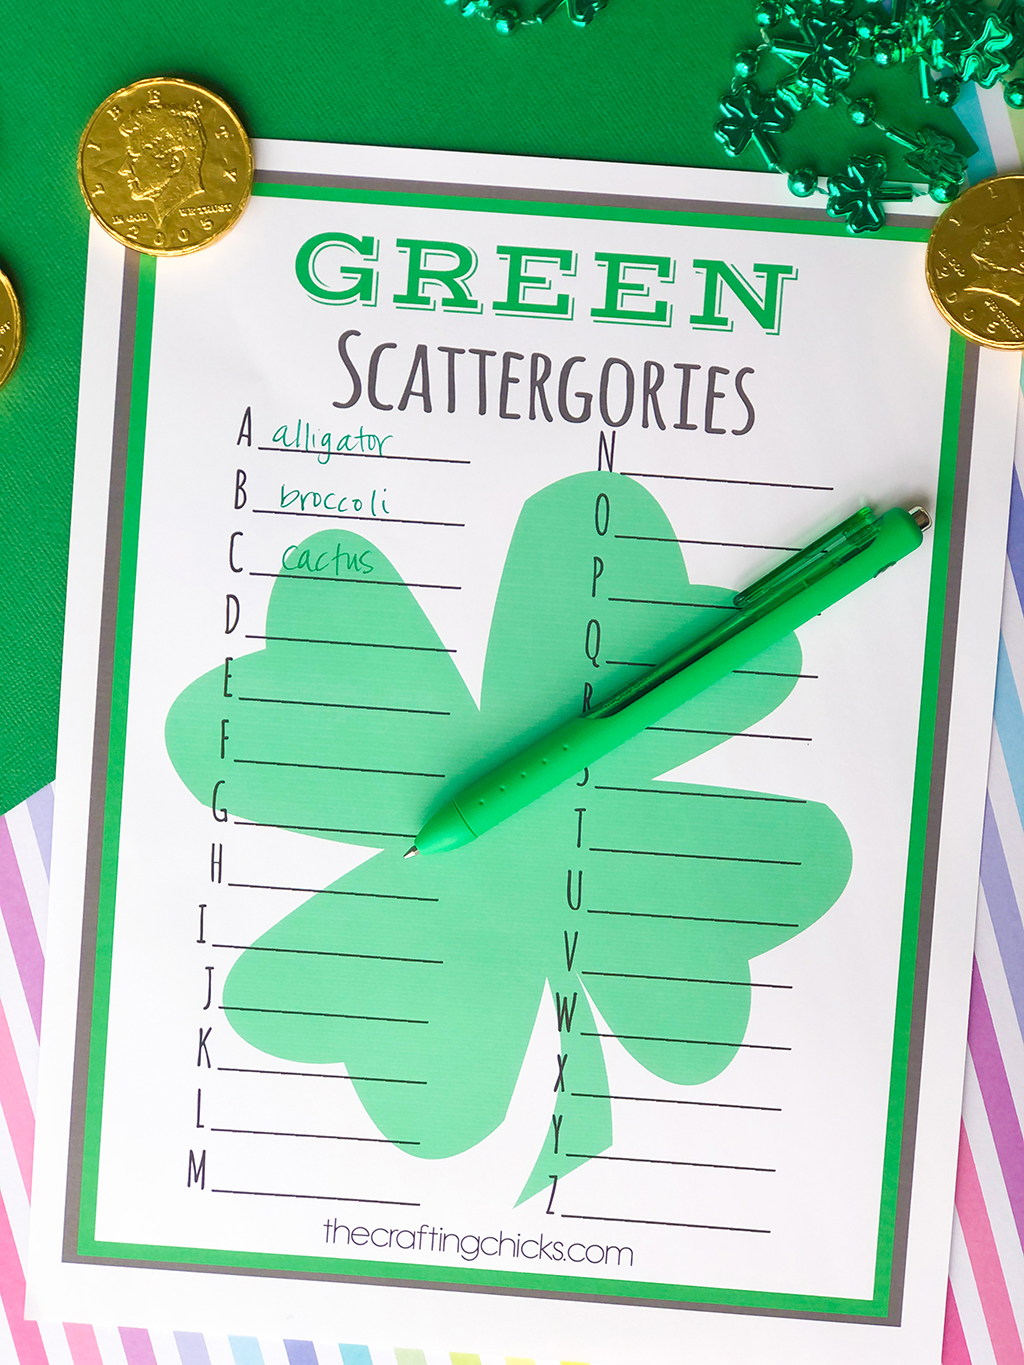 St. Patrick's Day GREEN Scattergories on a green and rainbow background